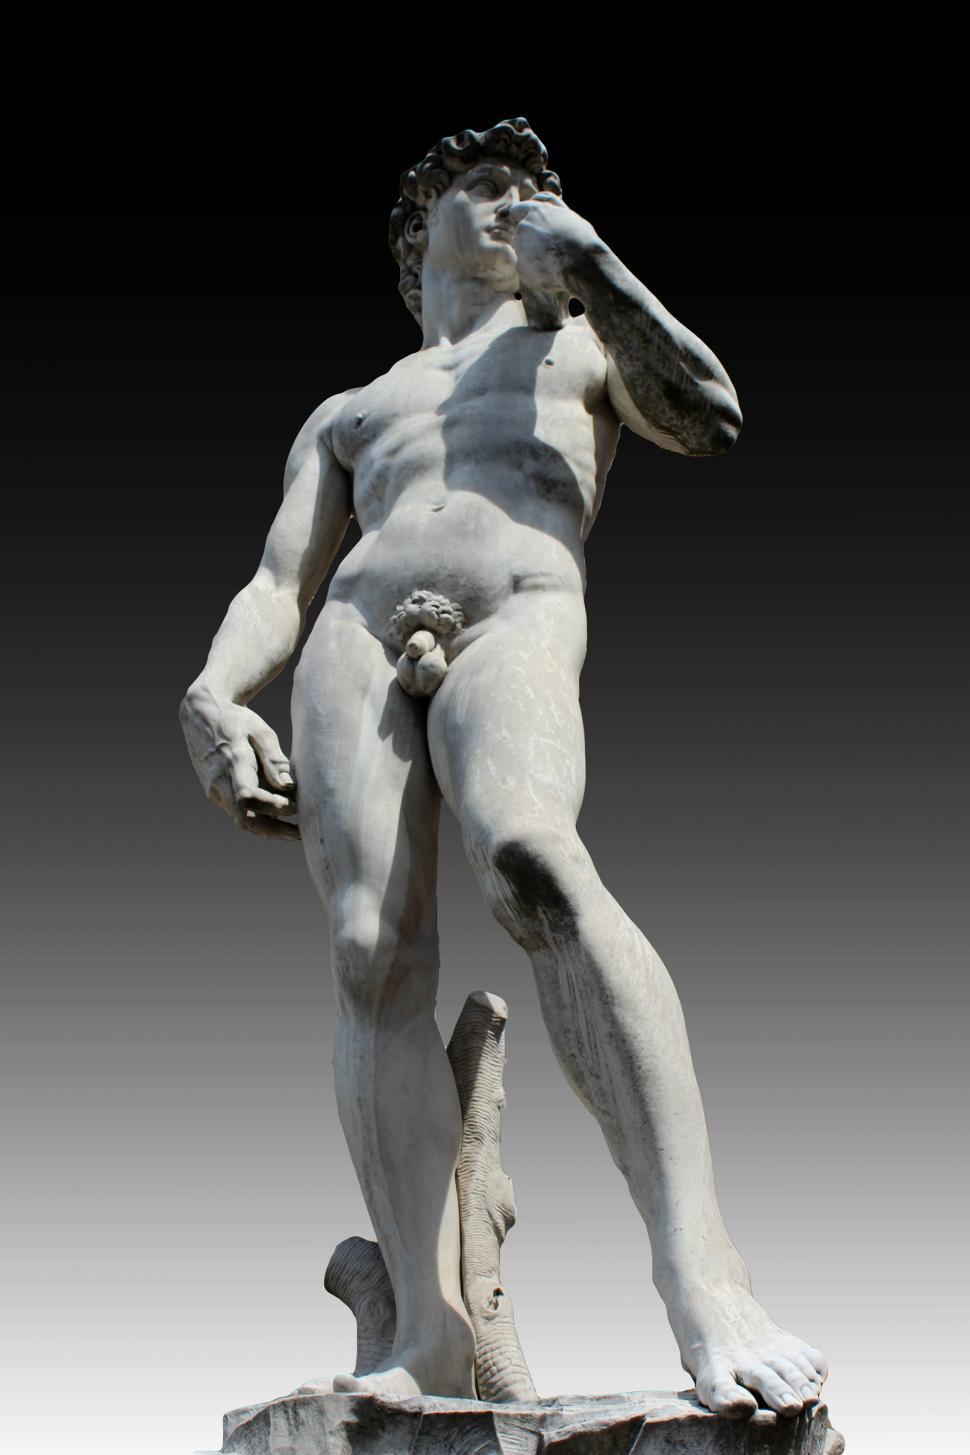 Download Free Stock Photo of Statue of David - Florence - Isolated Over Neutral-Color Backgro 